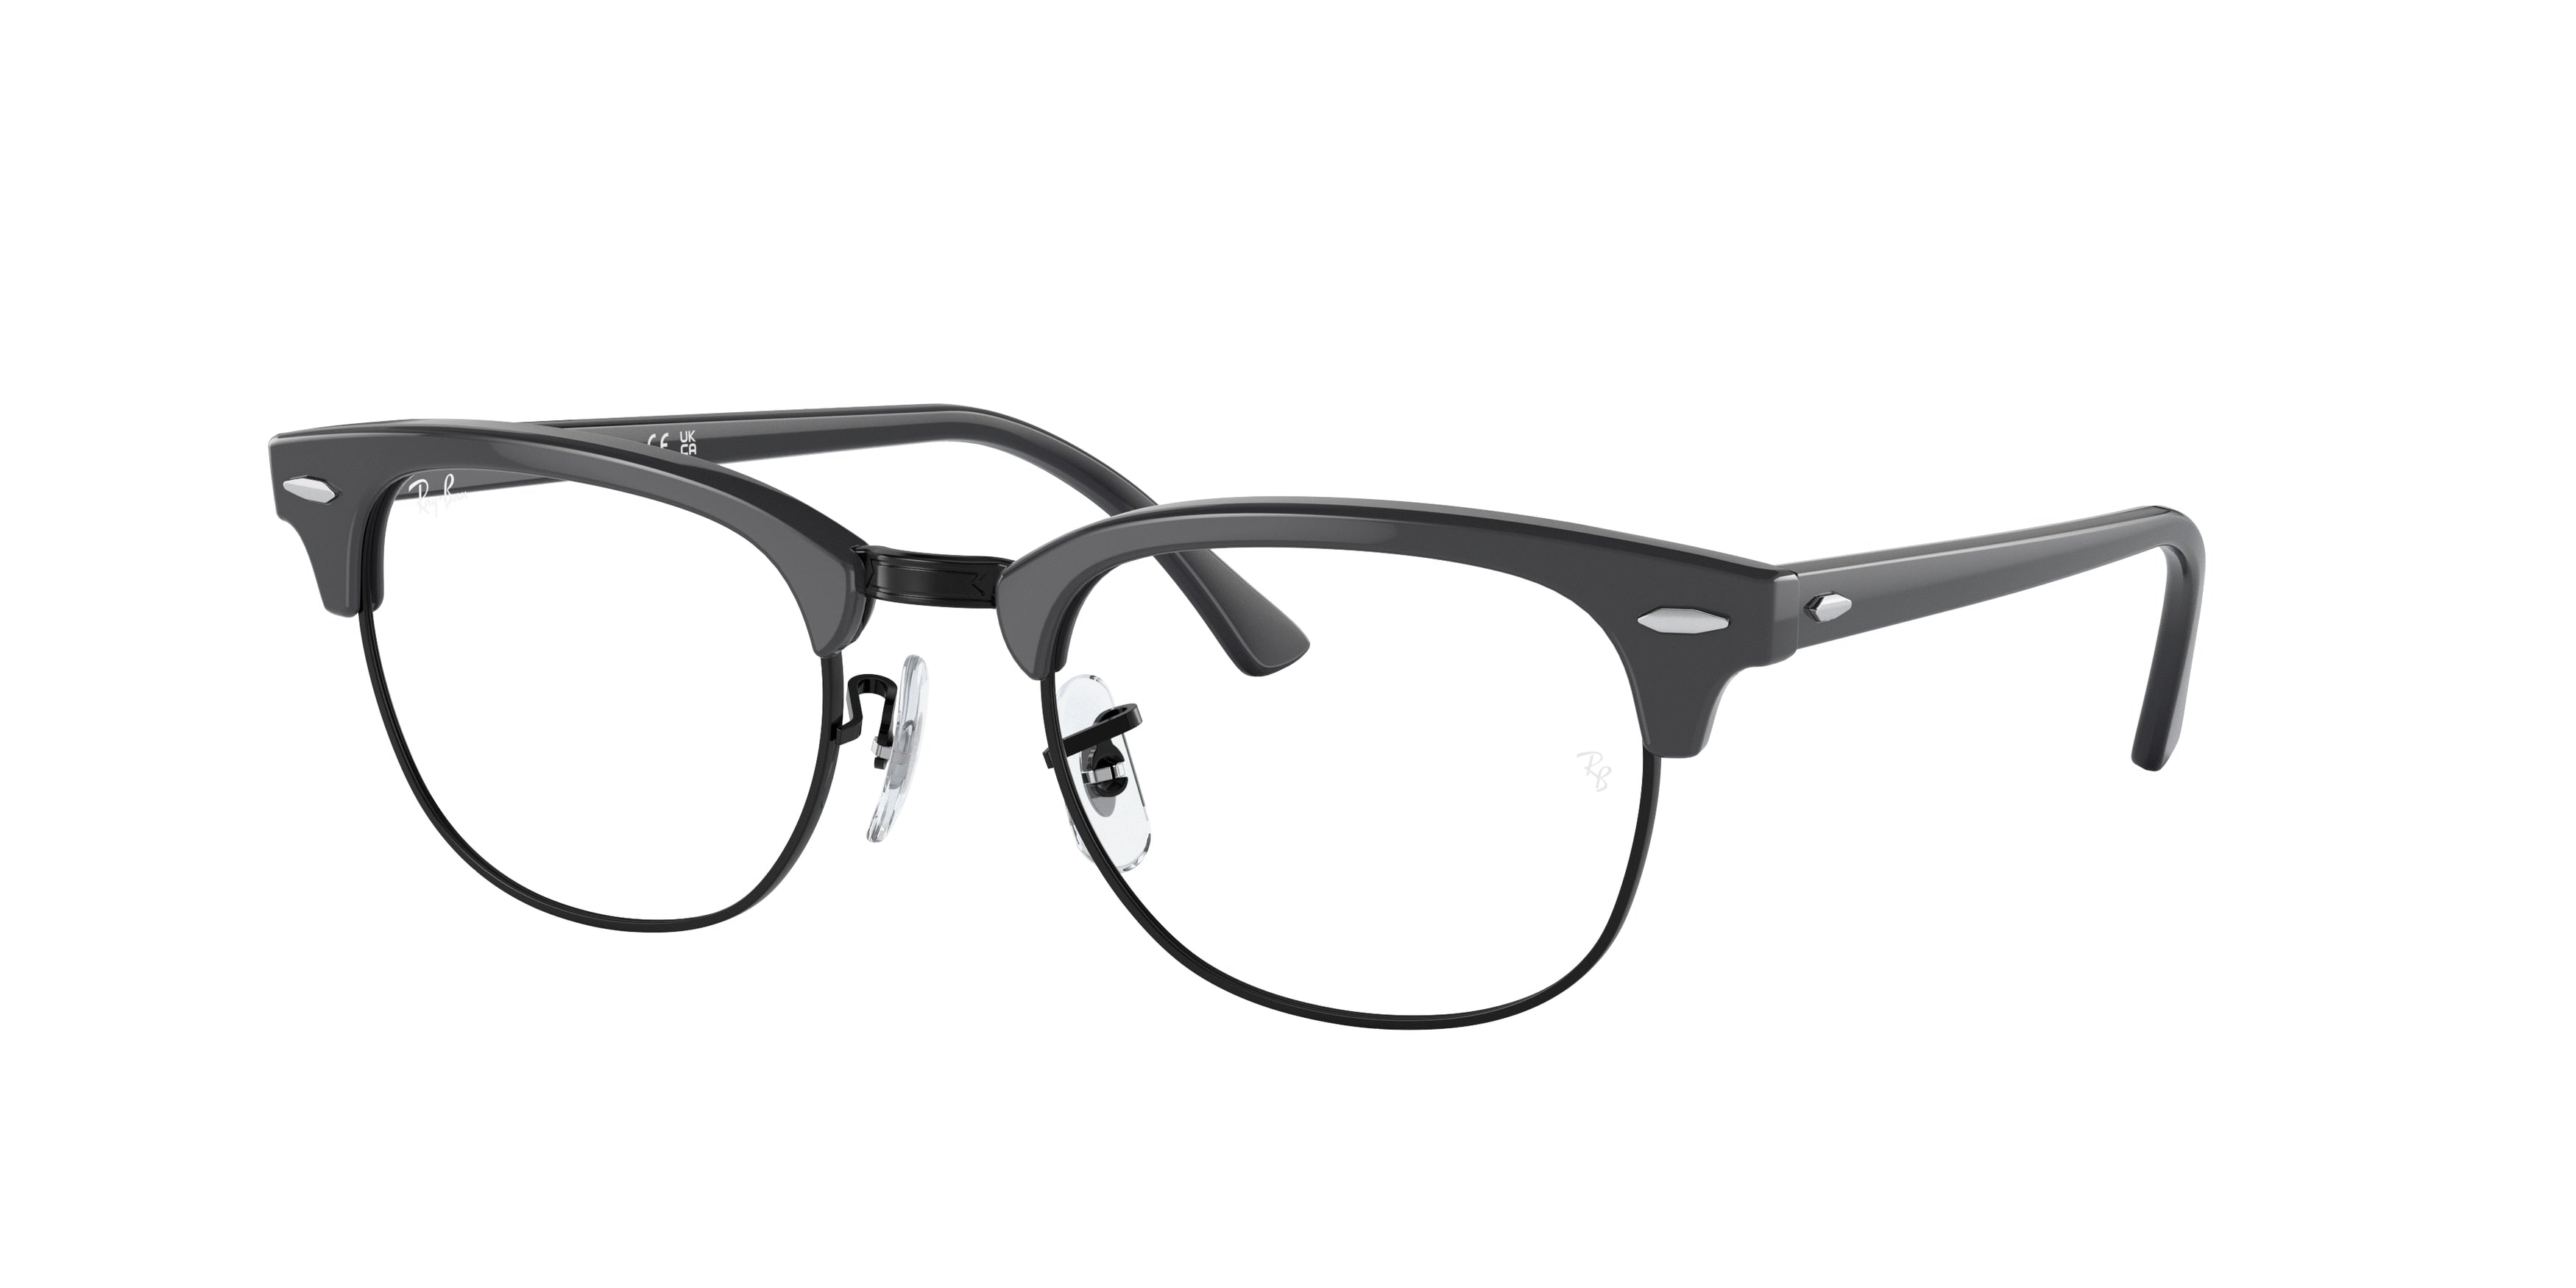 Ray-Ban Optical CLUBMASTER RX5154 Square Eyeglasses  8232-Grey On Black 50-145-21 - Color Map Grey